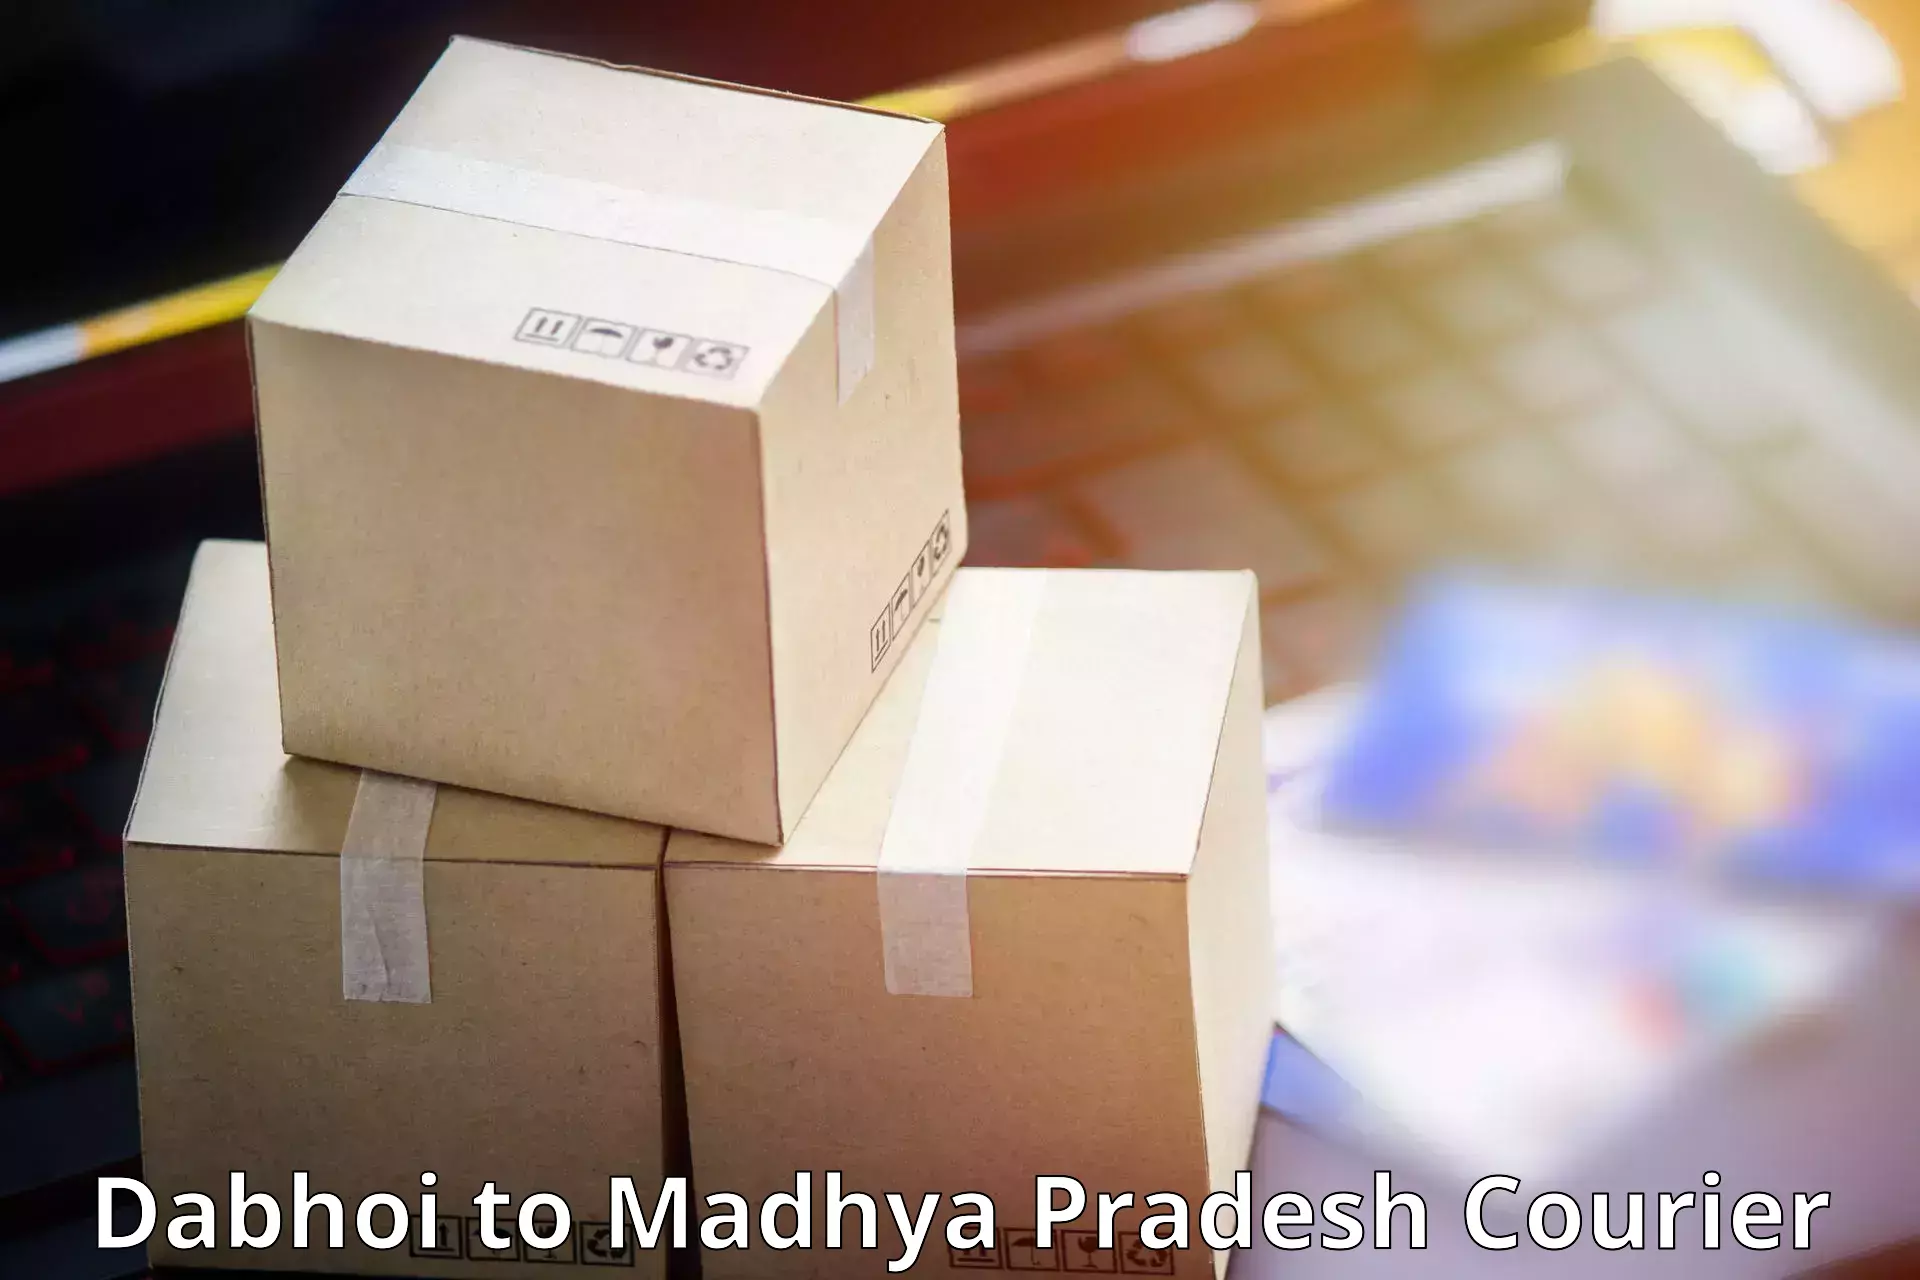 On-call courier service Dabhoi to Datia